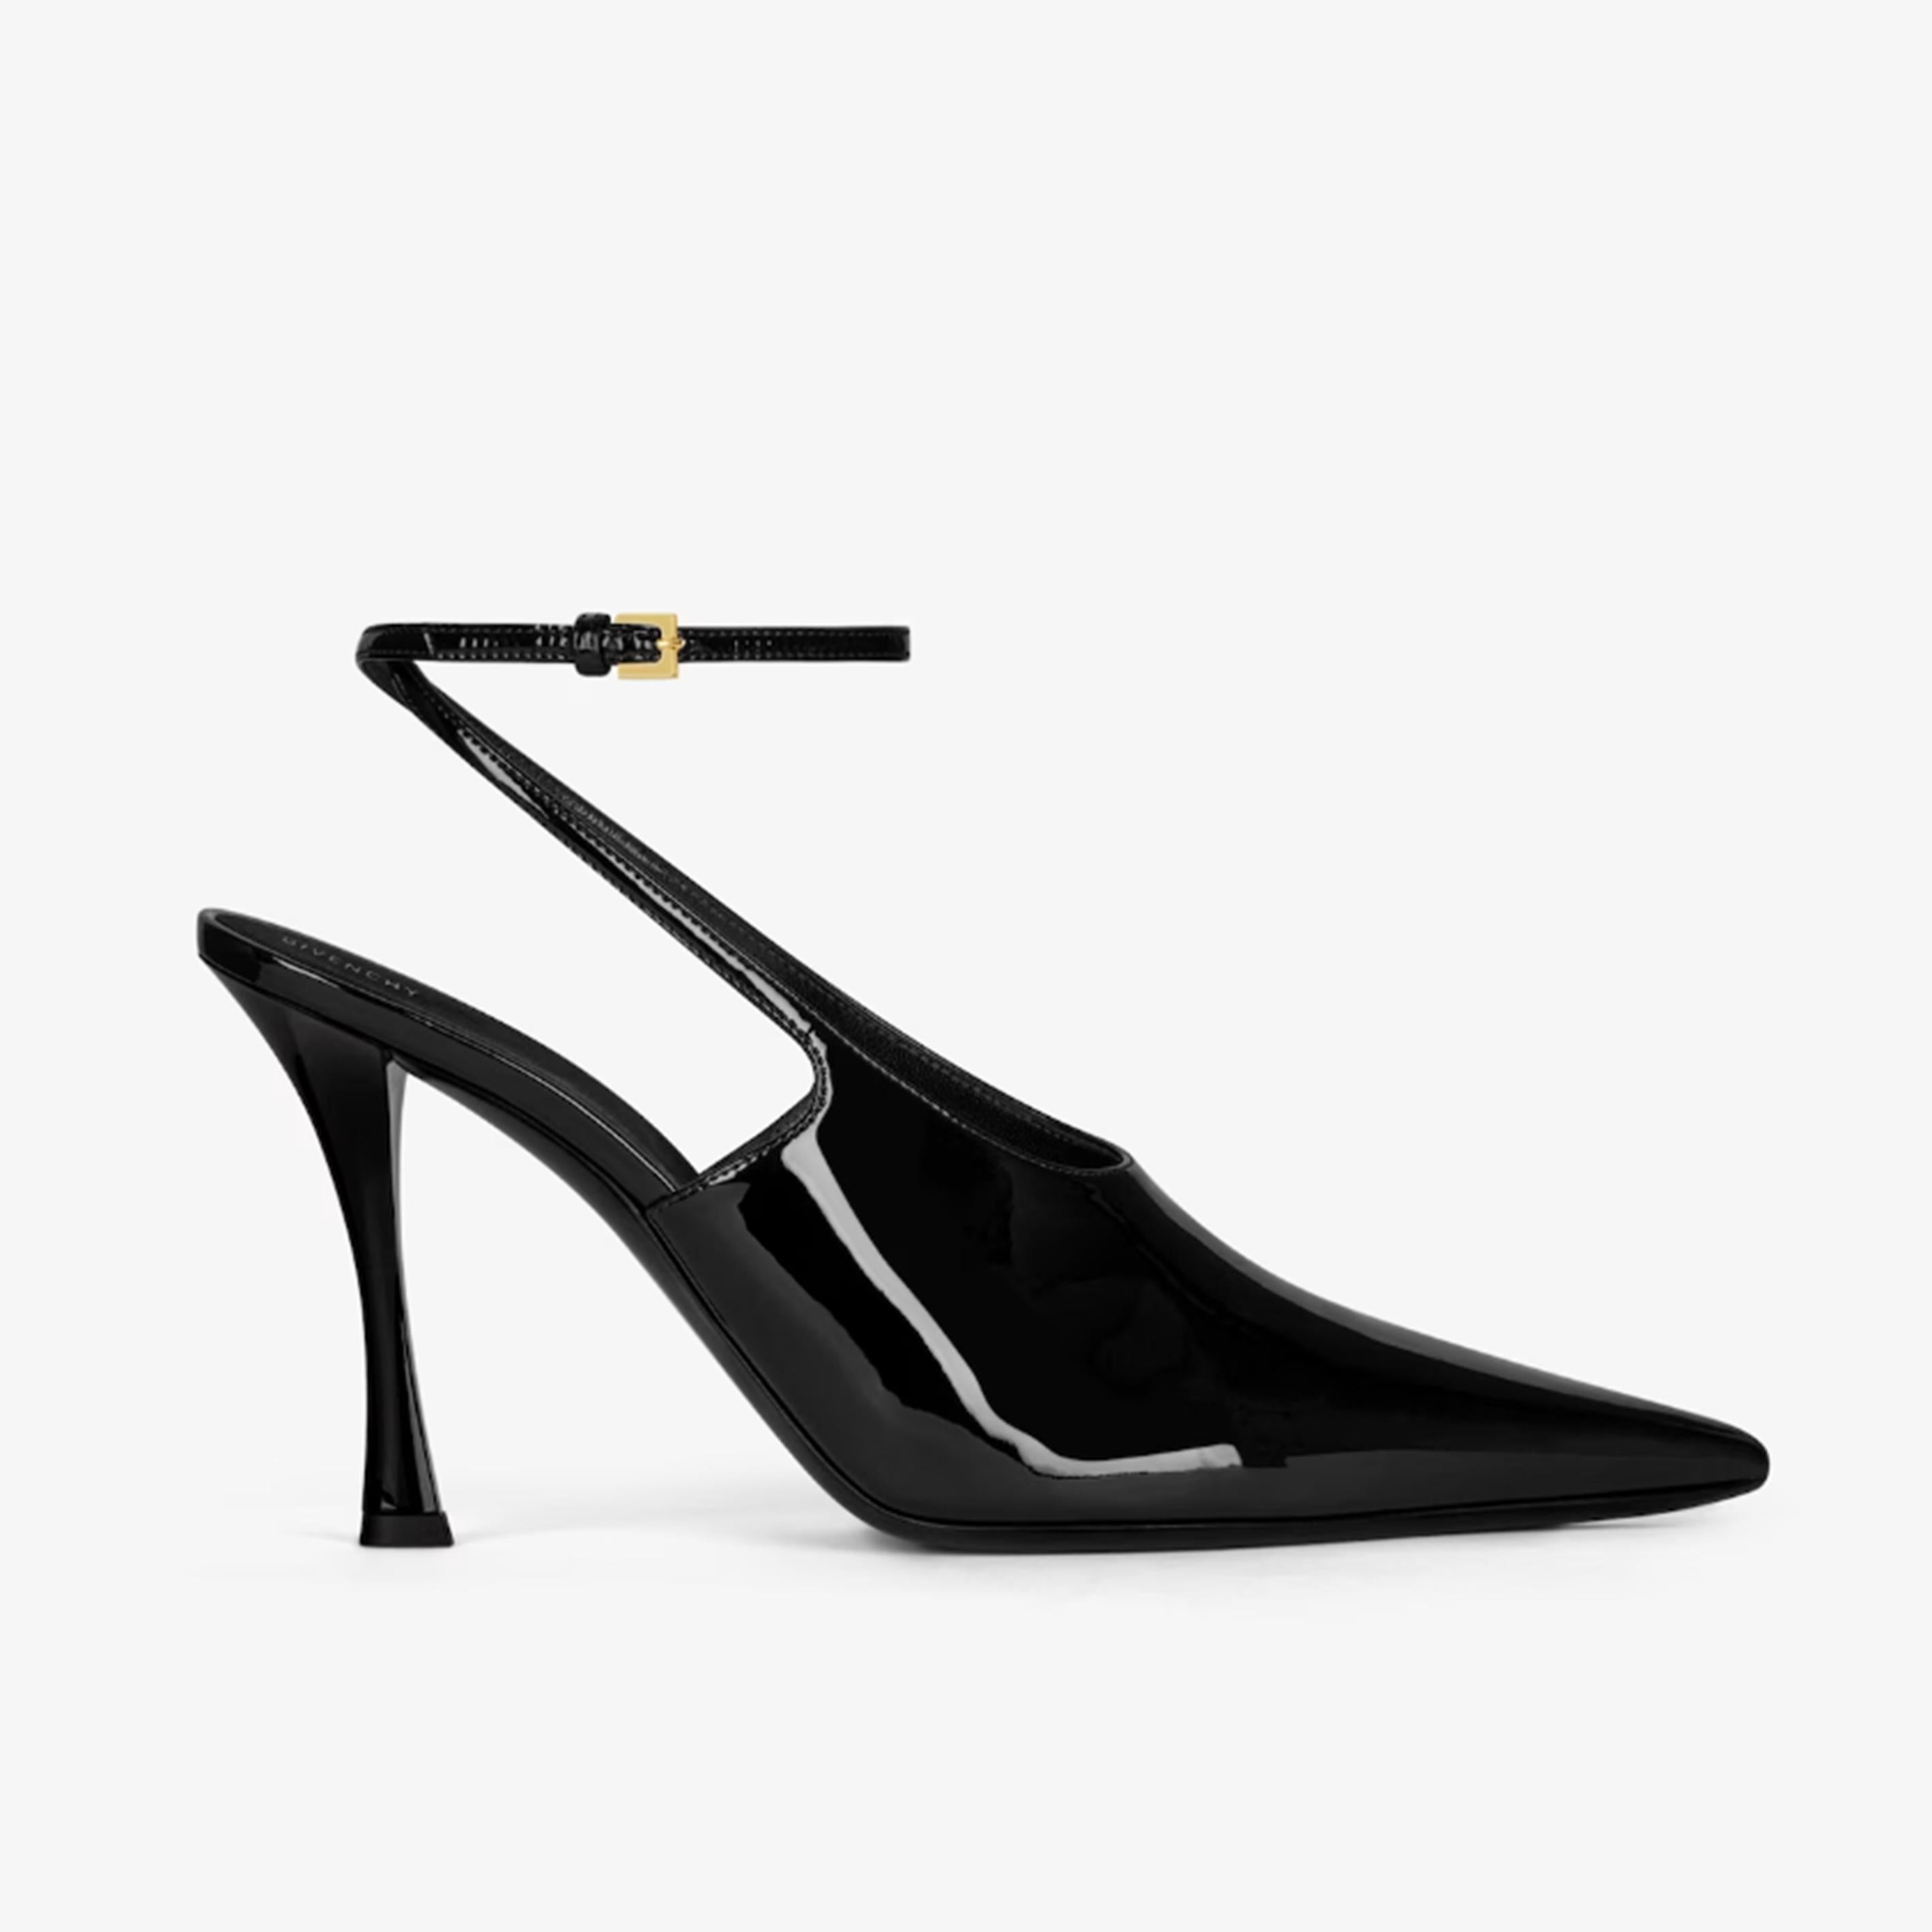 GIVENCHY SS24 Show slingbacks in patent leather


SIZE 36



Slingbacks with pointy toe in patent calfskin leather.
Show line.
Décolleté.
Thin strap to wrap around the ankle with golden-finish buckle.
Thin heel.
Leather insole.
Heel height : 3.8